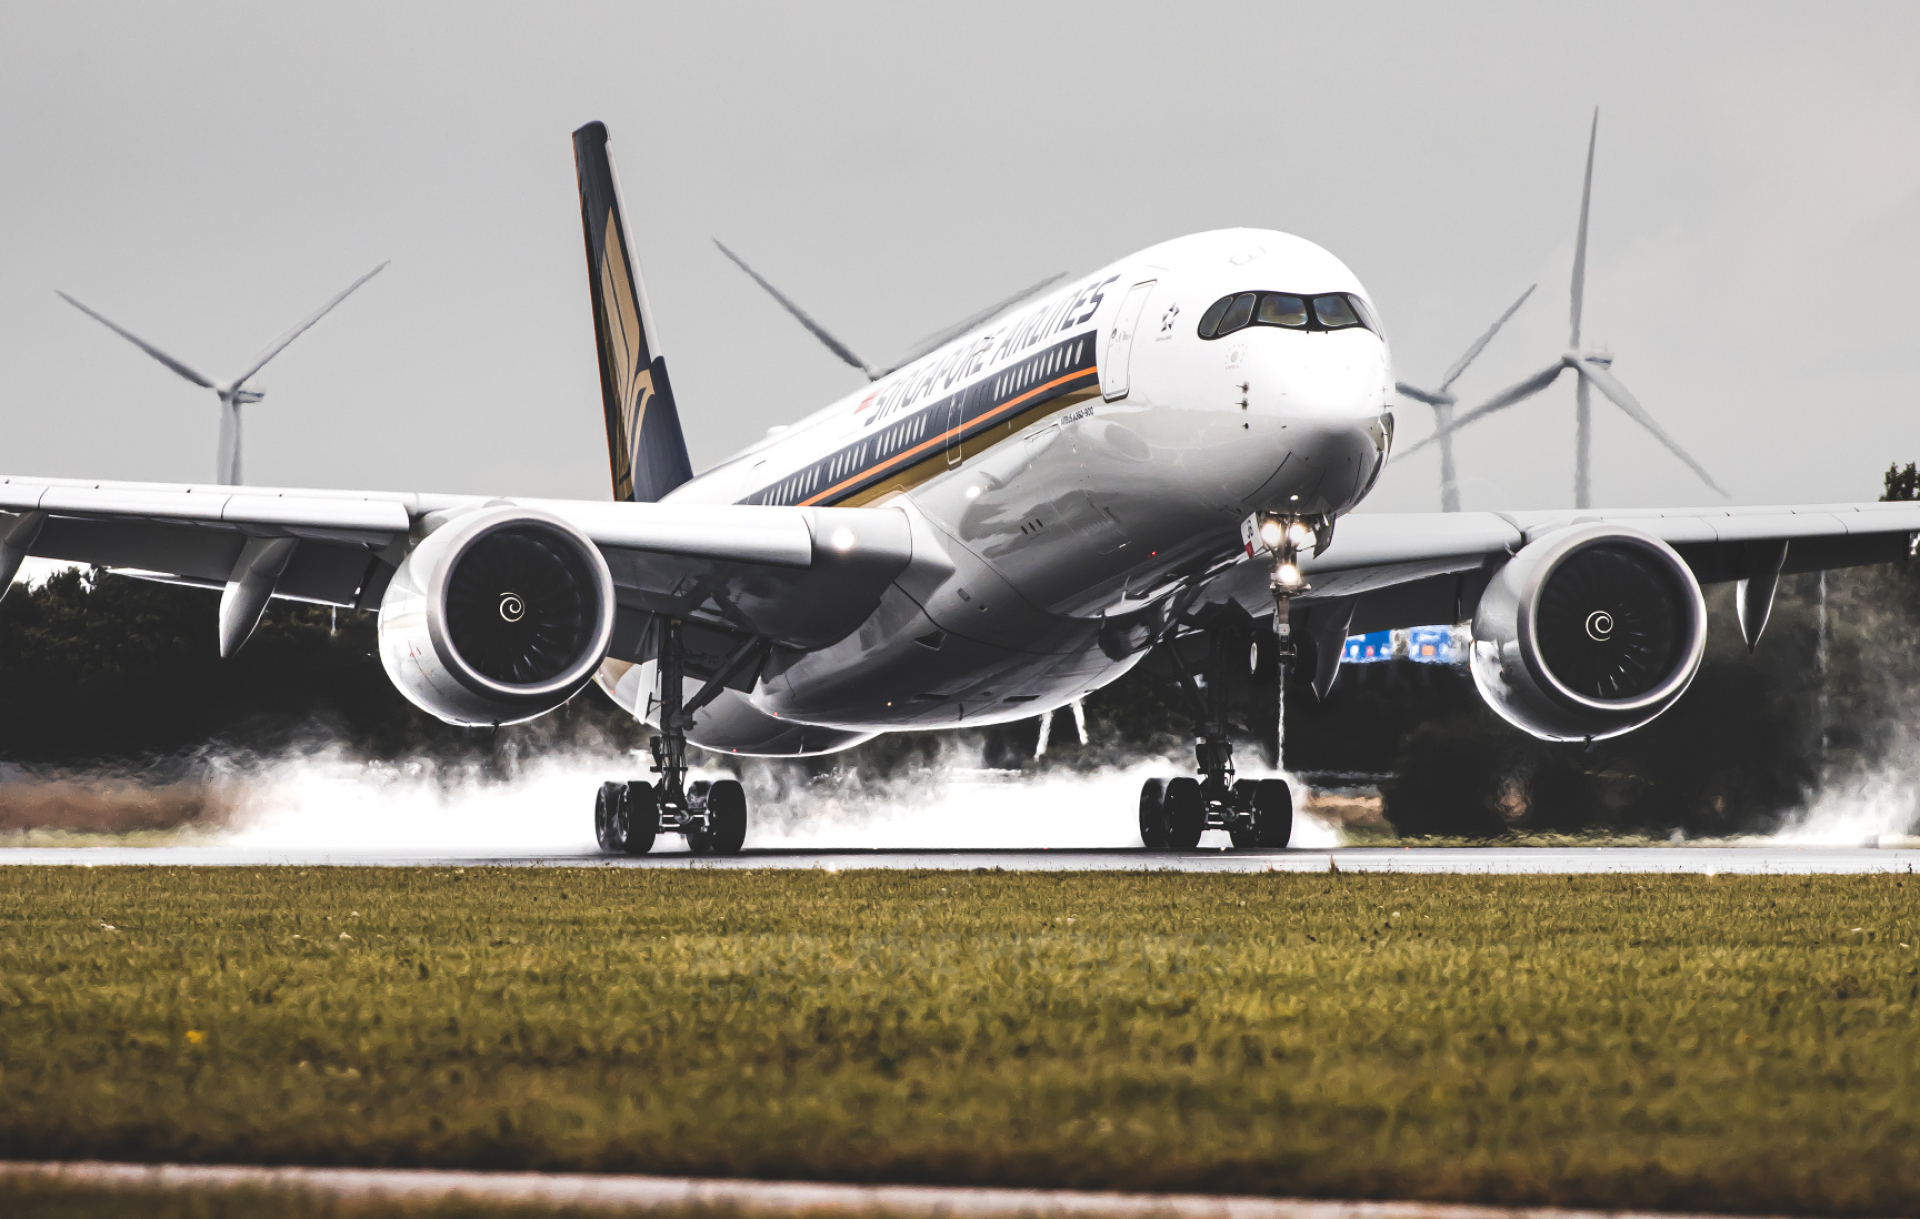 Singapore Airlines, 9v sjb, Airbus a350 900, Amsterdam schiphol, 1920x1220 HD Desktop